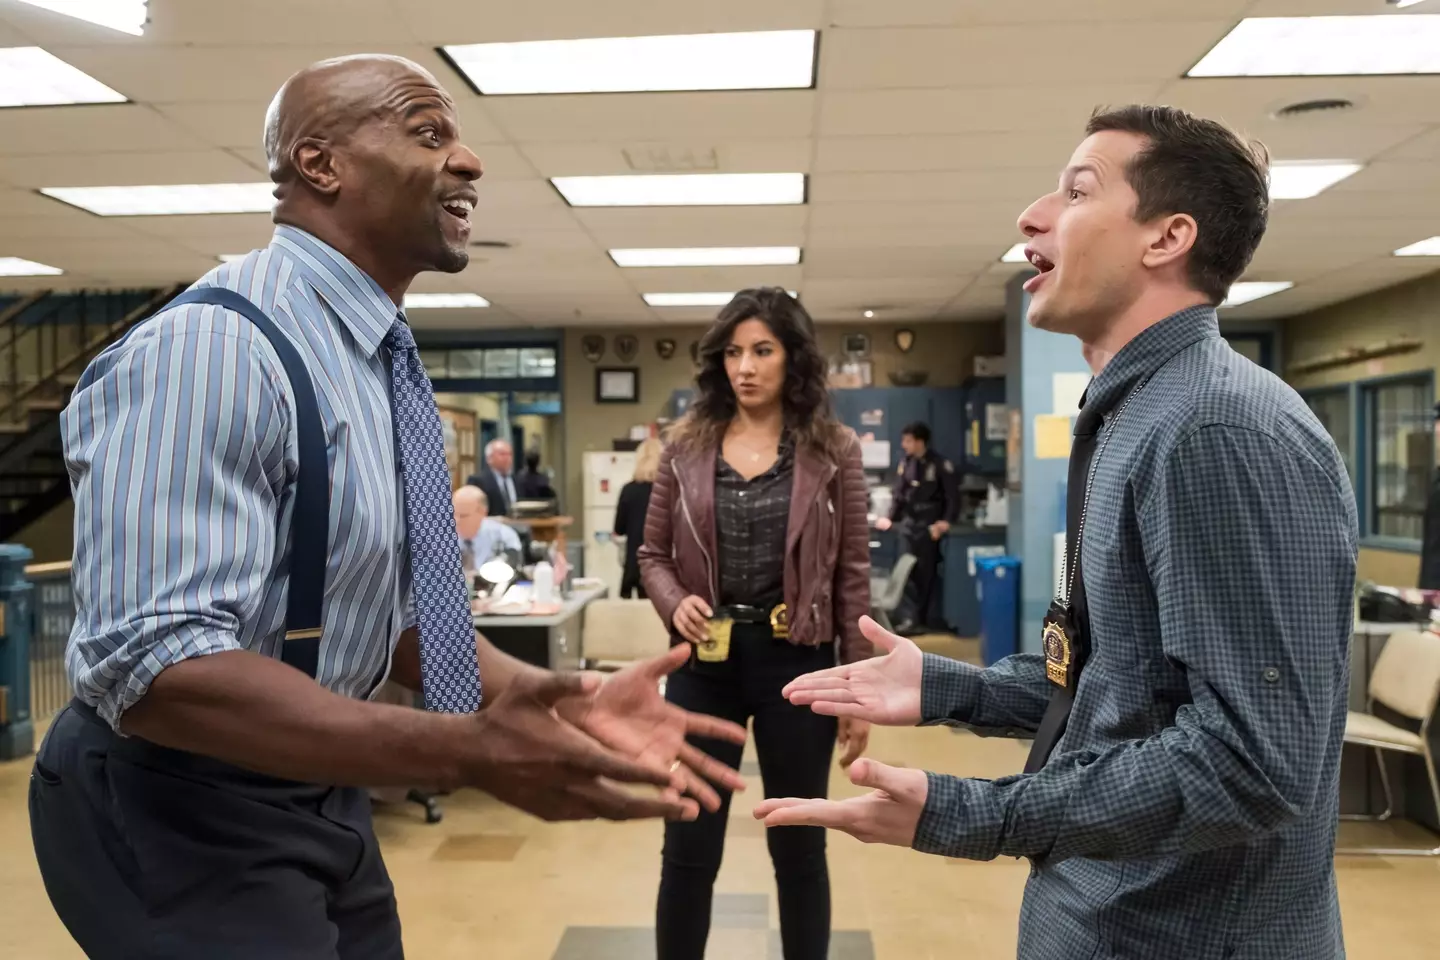 A Brooklyn Nine-Nine special will air on E4 next month.